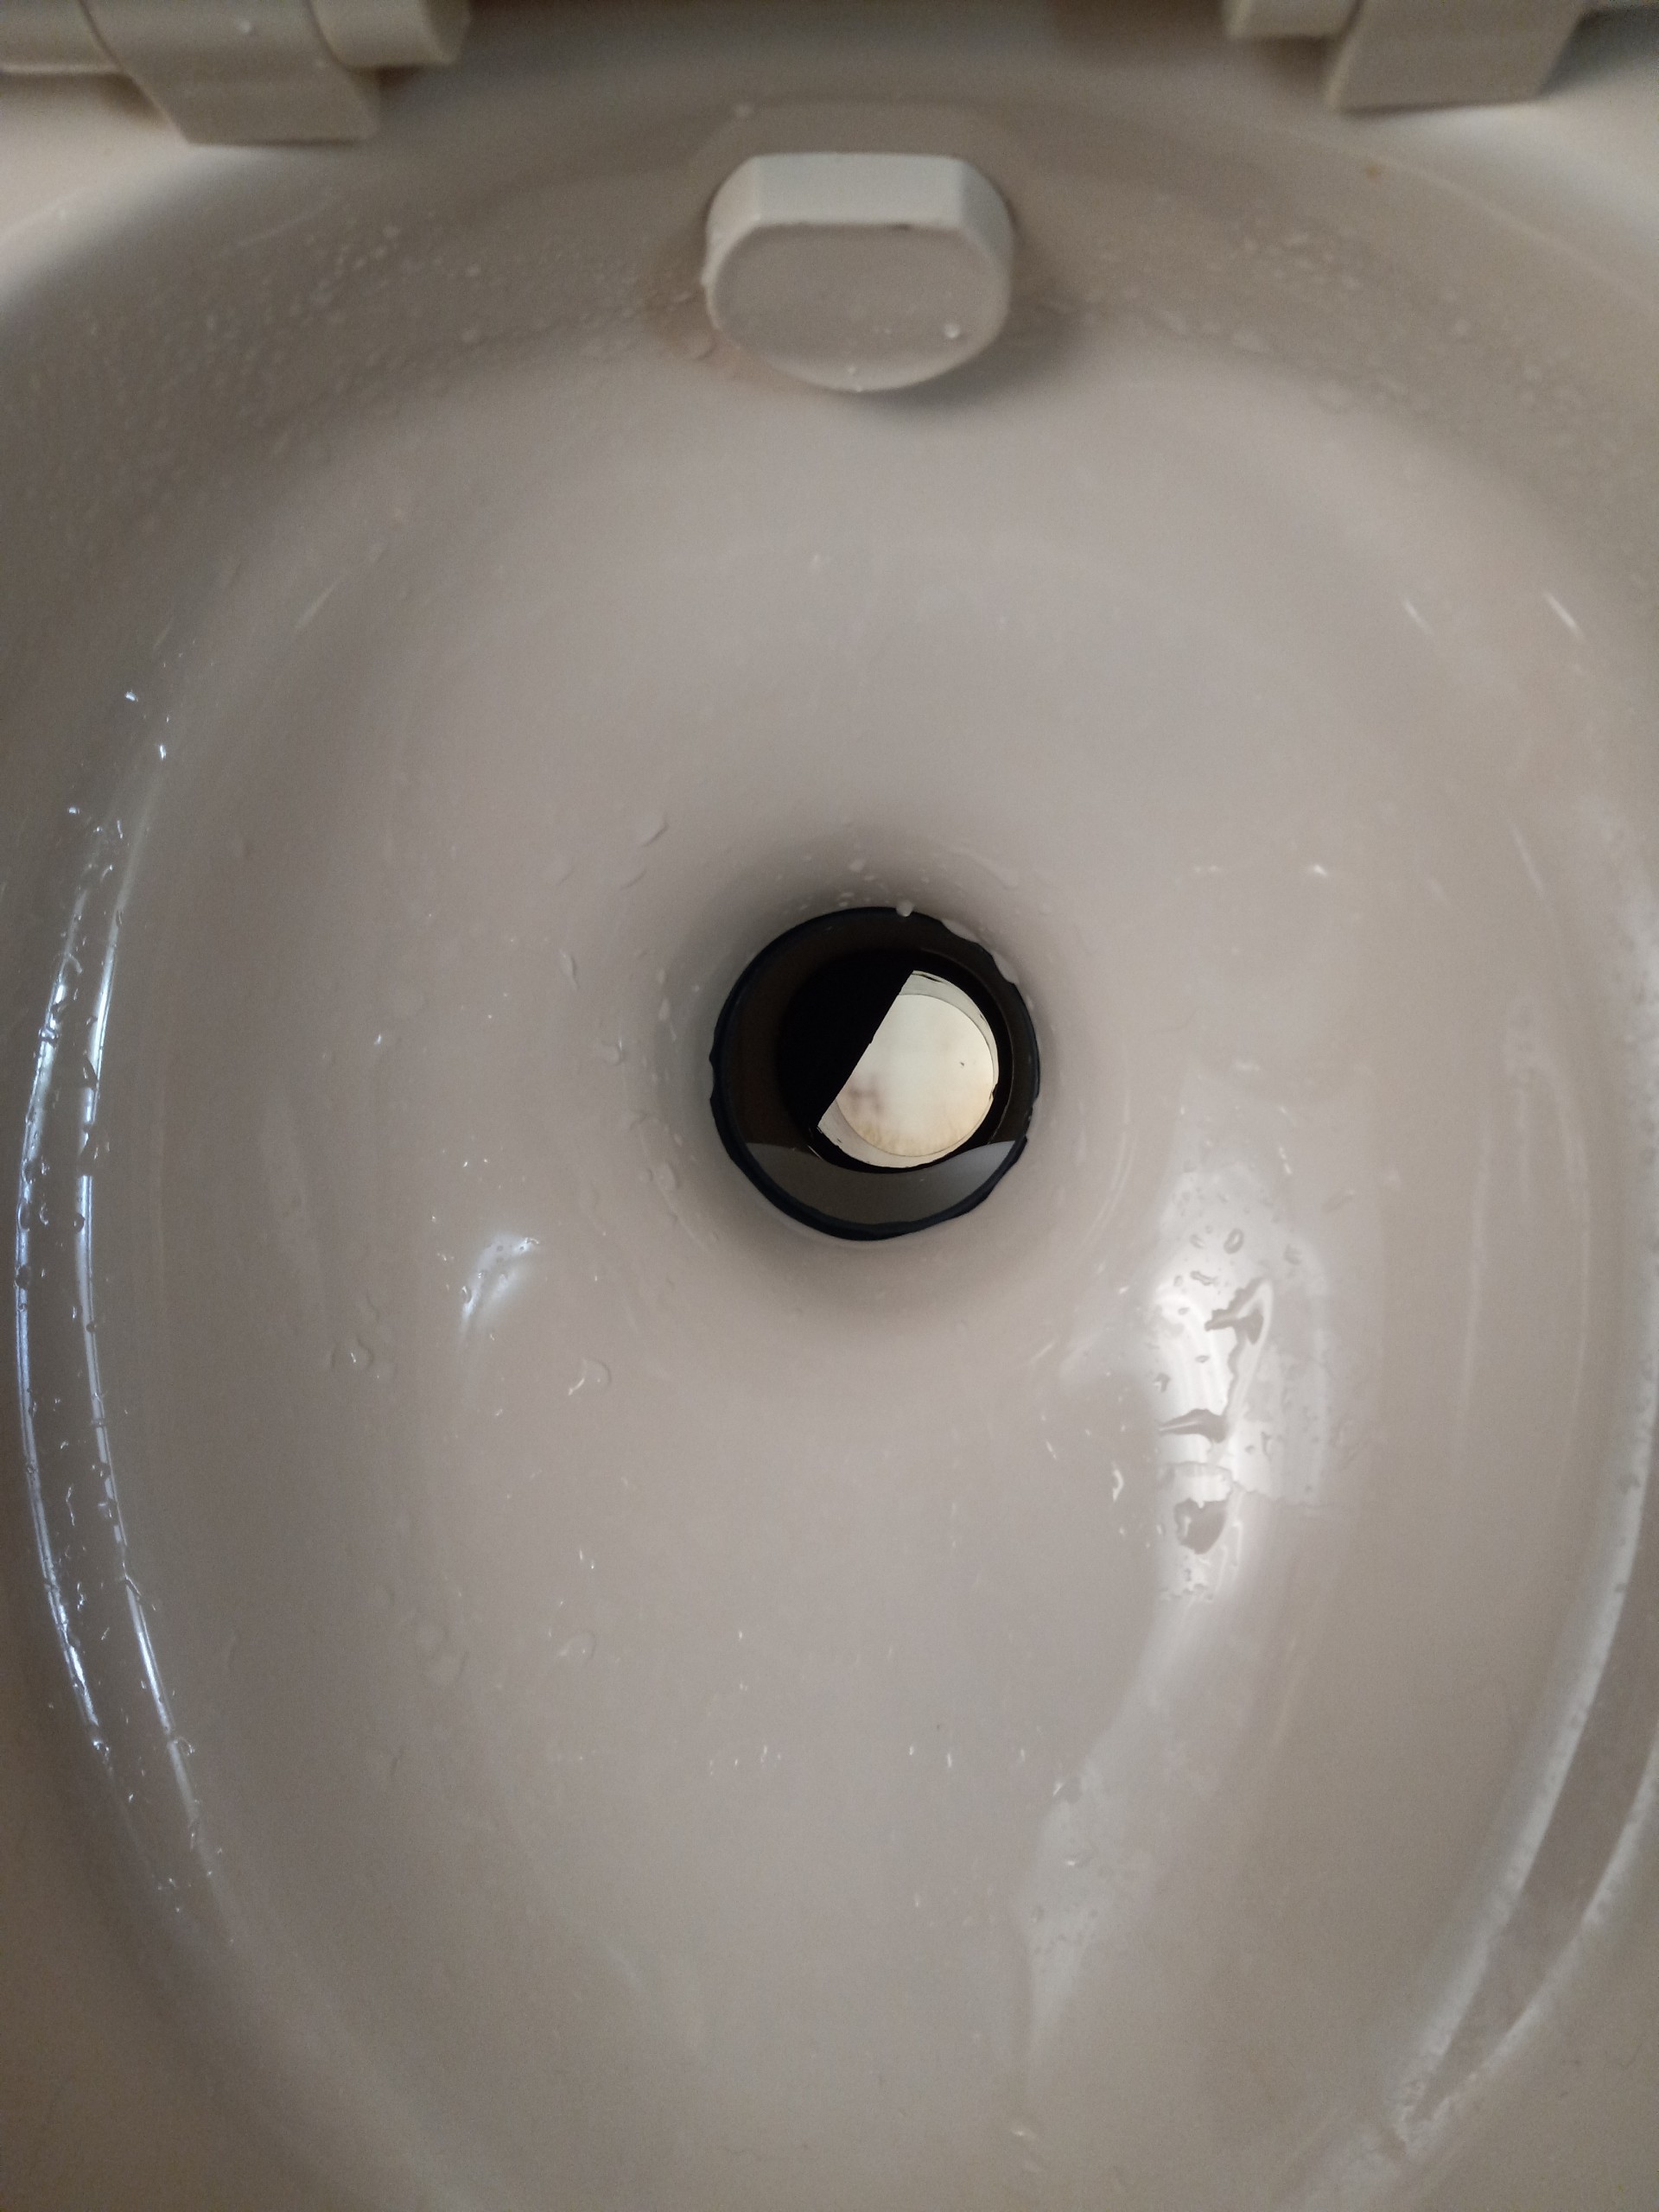 Toilet Misapplied Gasket Sliding Over Opening